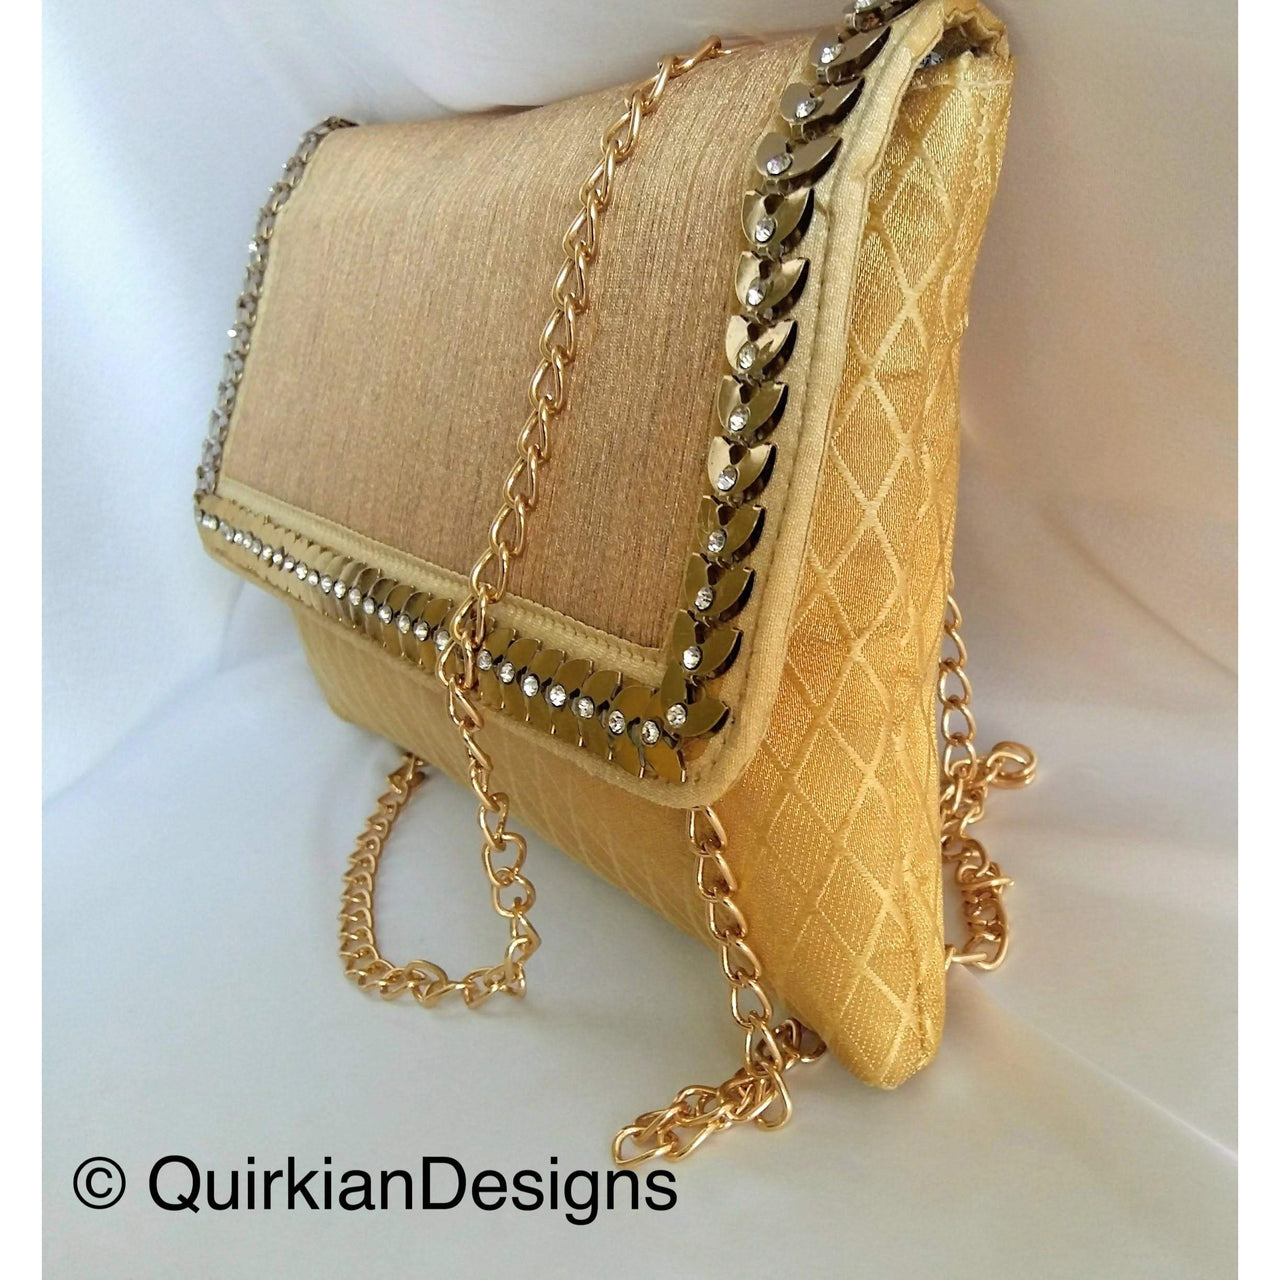 Beige And Copper Fabric Clutch Purse With Gold And Diamante Beads, Wedding Clutch, Party Bag